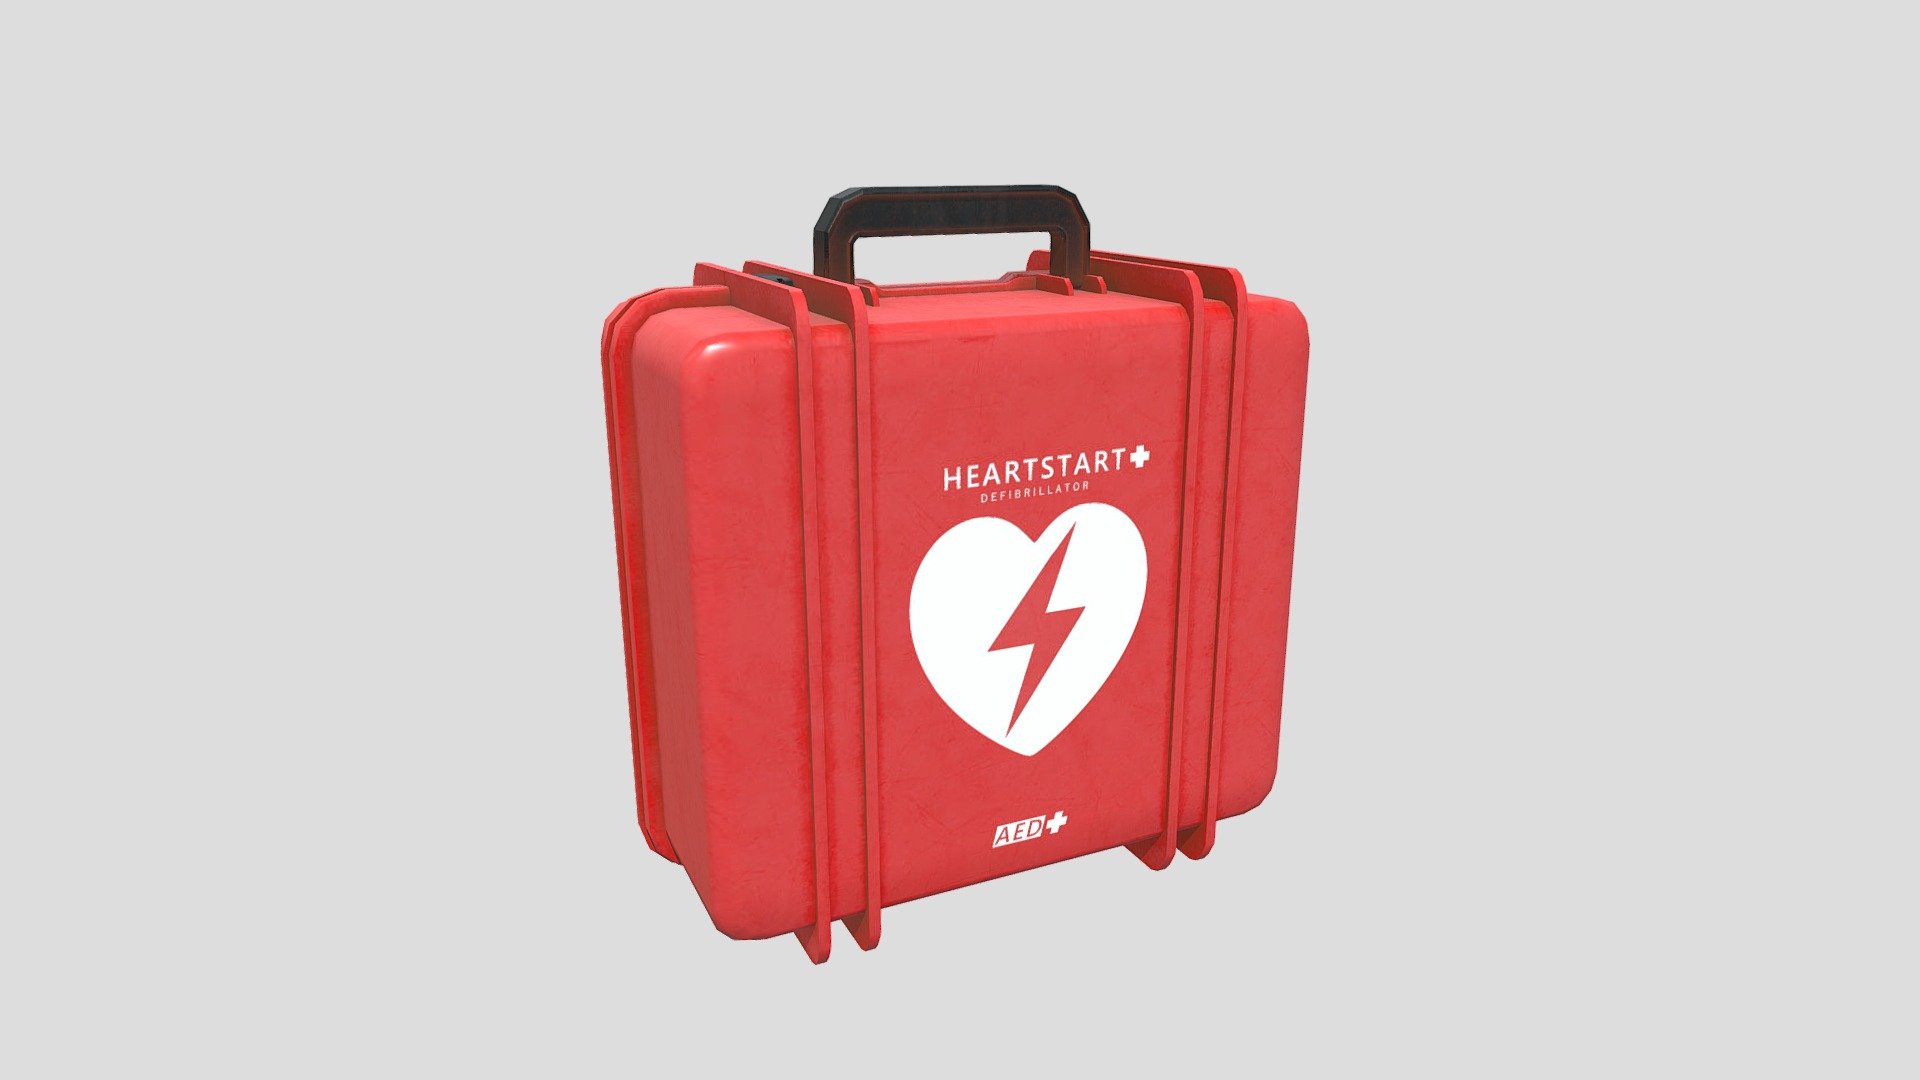 Plastic defibrillator case modelled in Maya and textured in Substance Painter 3d model